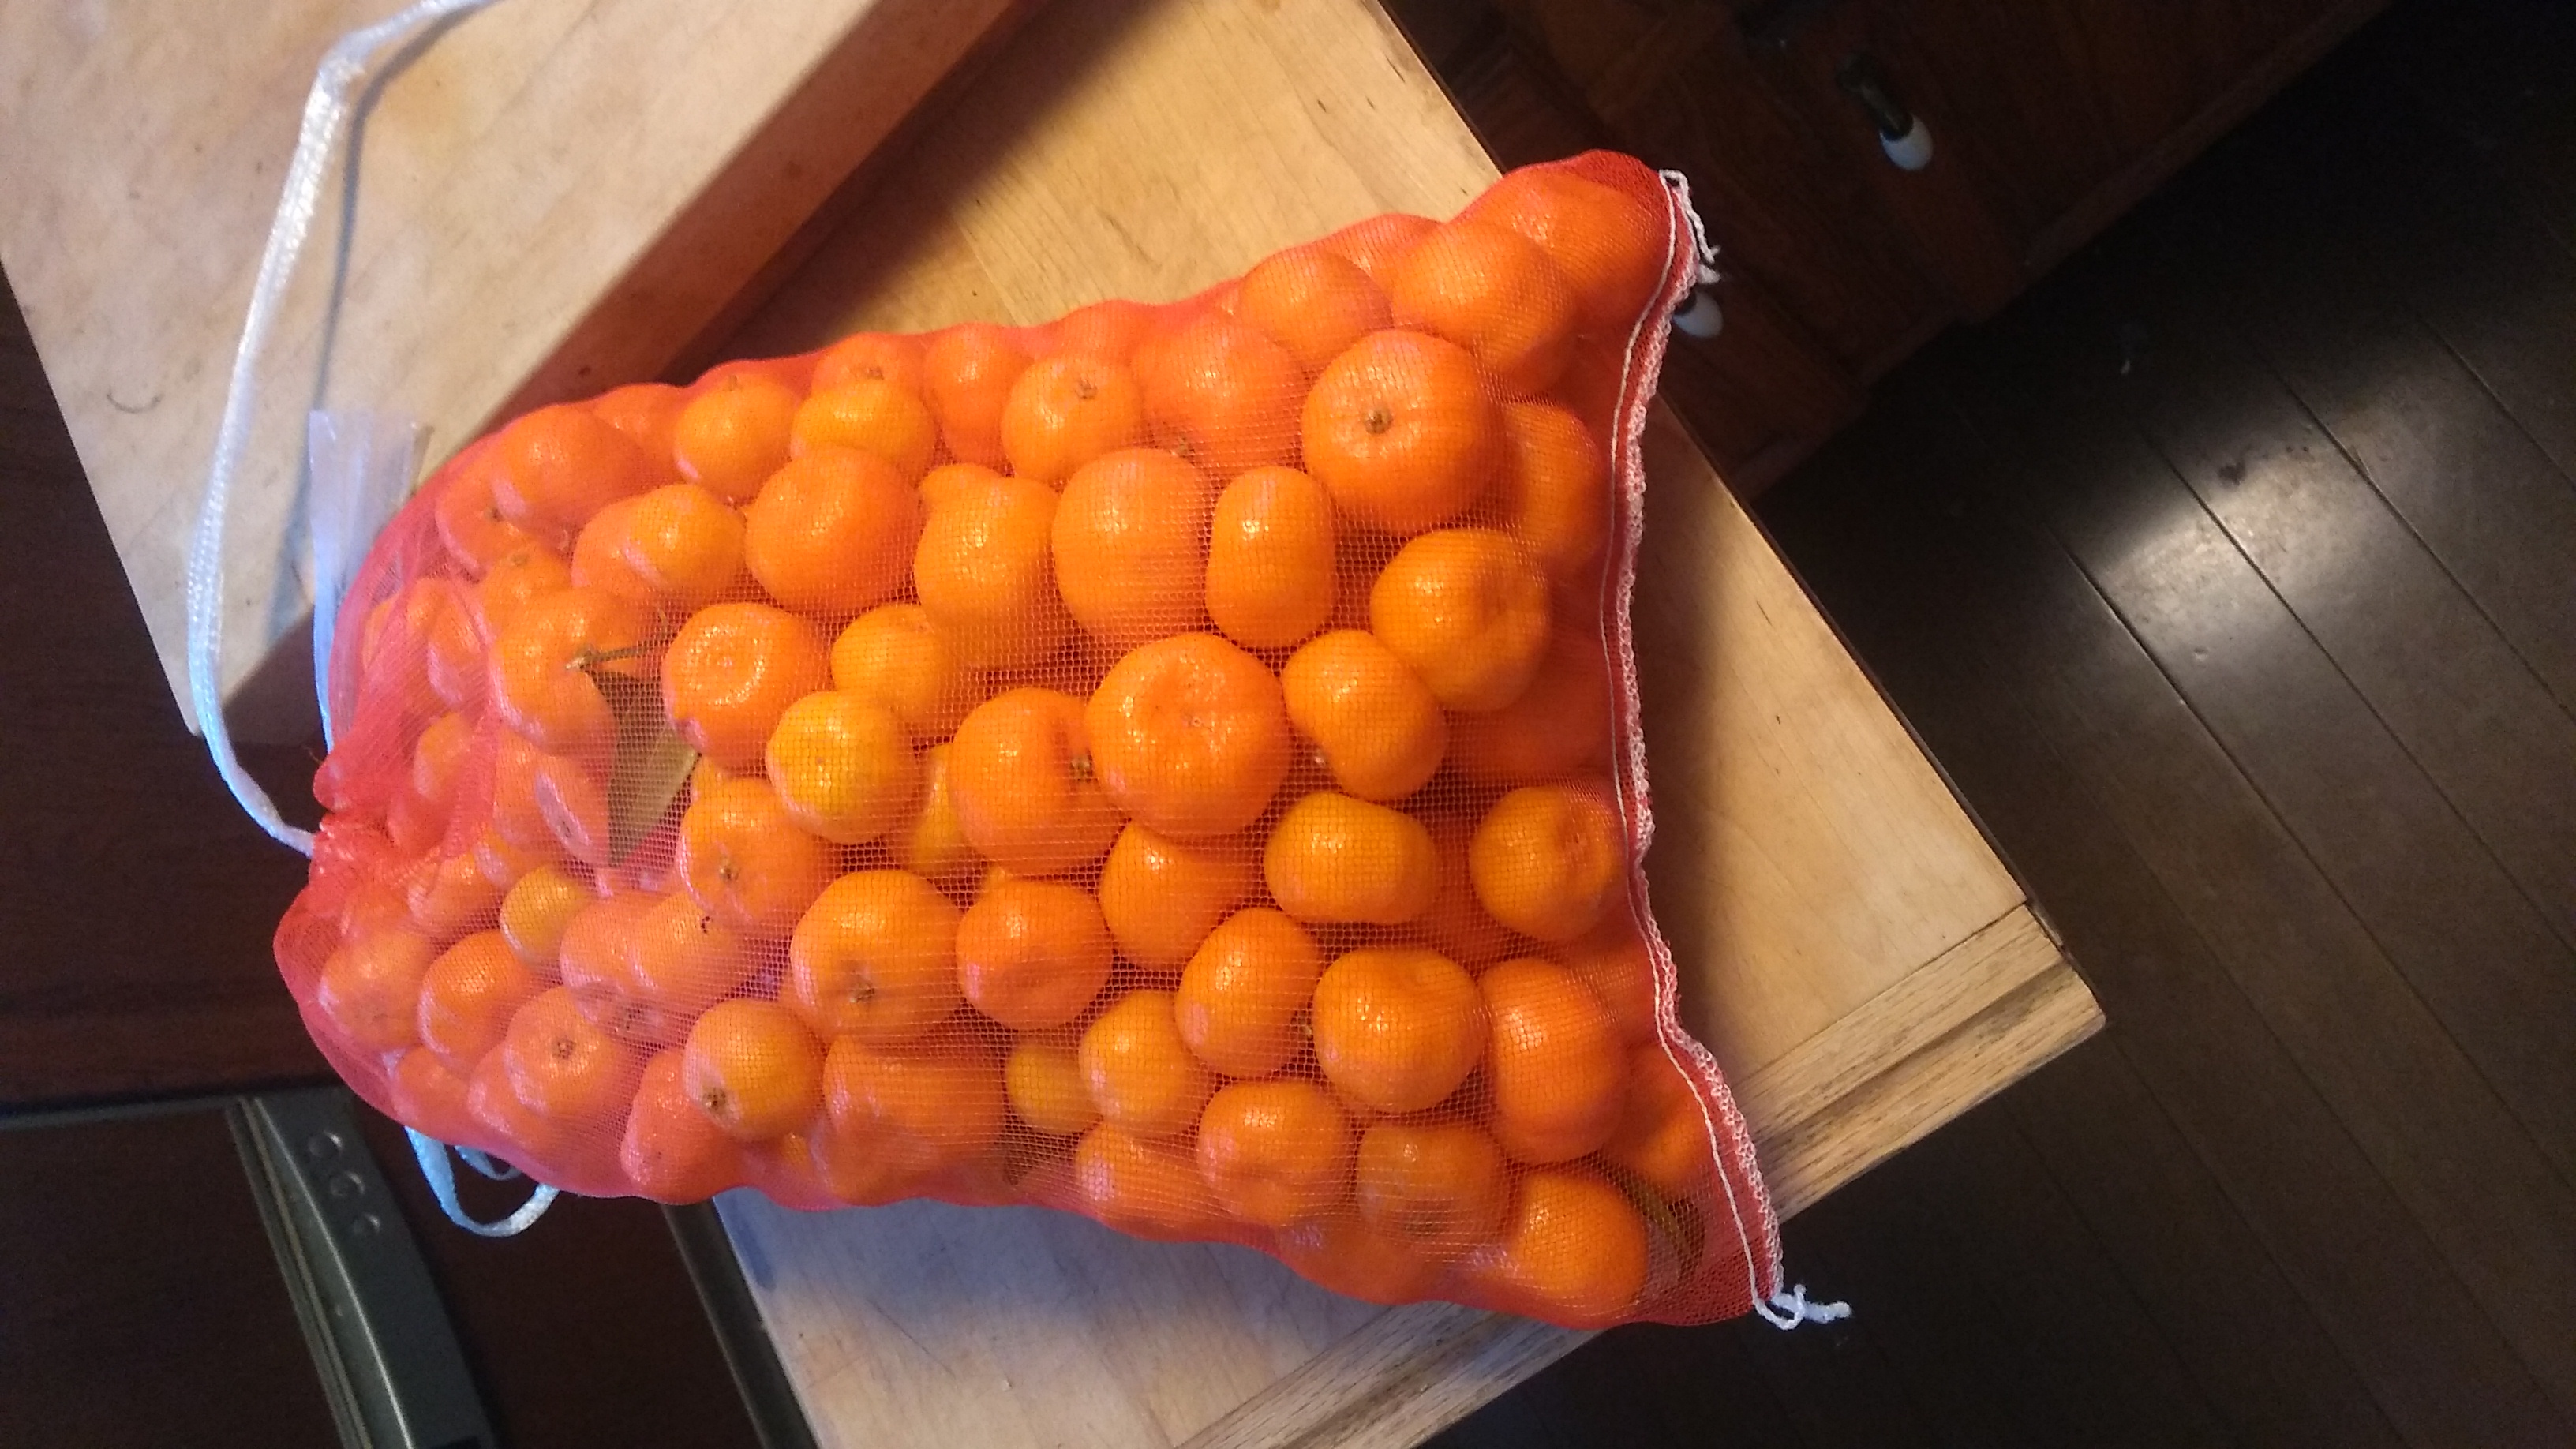 A net bag filled with shiikuasa fruit freshly cut from the tree, some with leaves still attached.